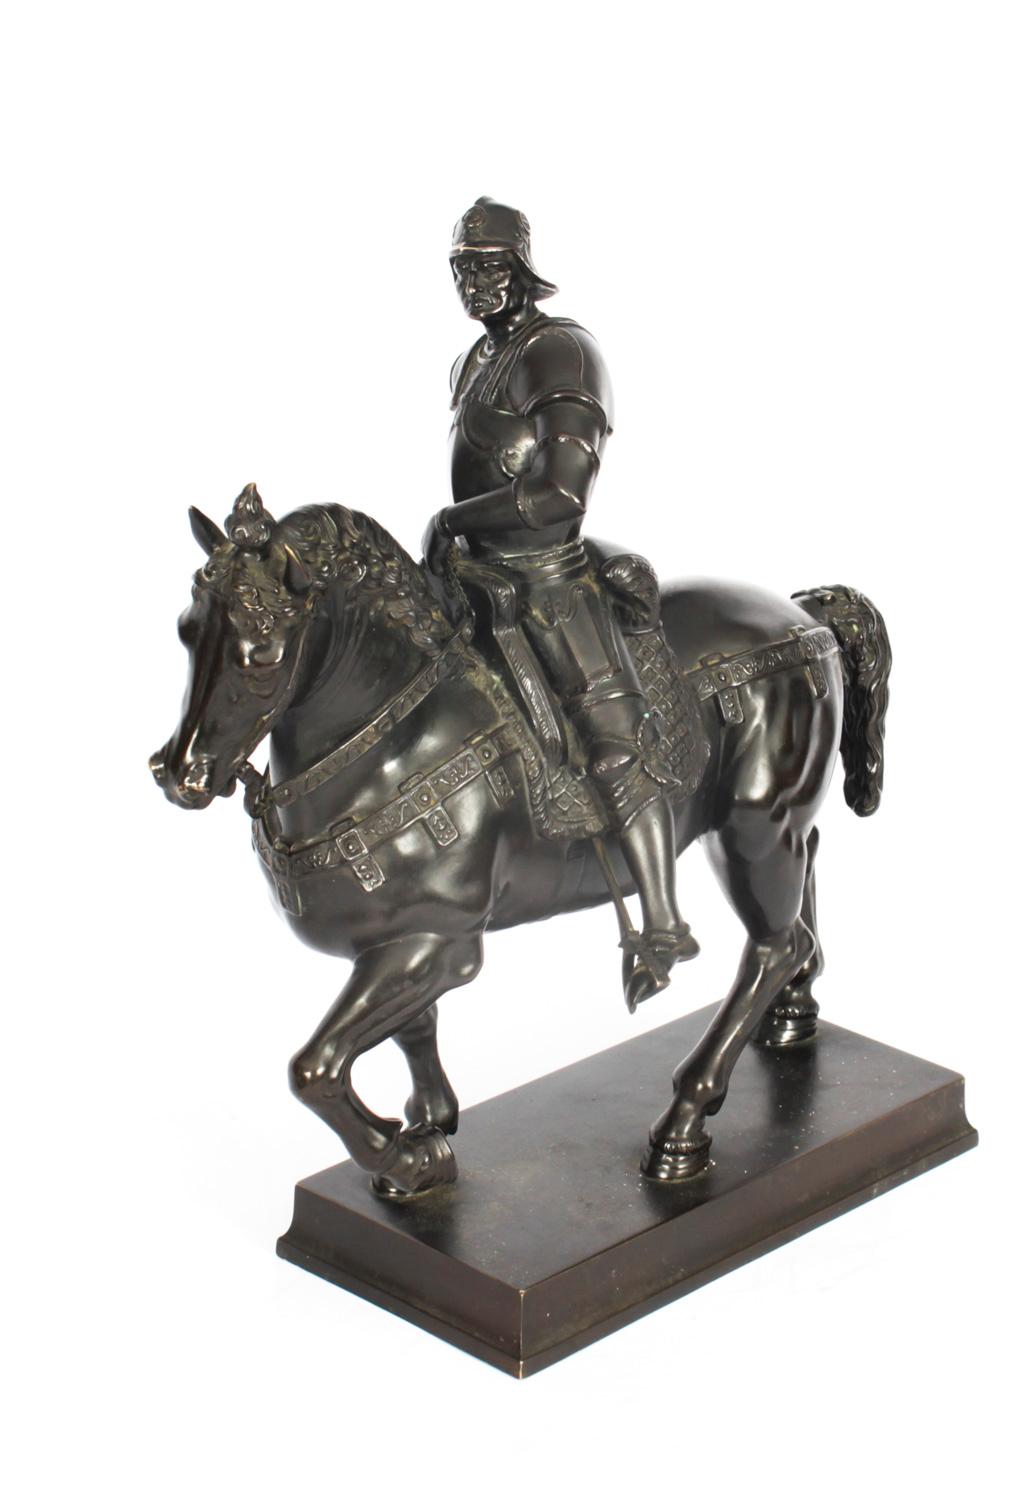 This is a superb large antique patinated bronze Equestrian Statue of Bartolomeo Colleoni, circa 1860 in date.
 
This stunning patinated bronze statue is after the original Renaissance sculpture which was executed by Andrea del Verrocchio in